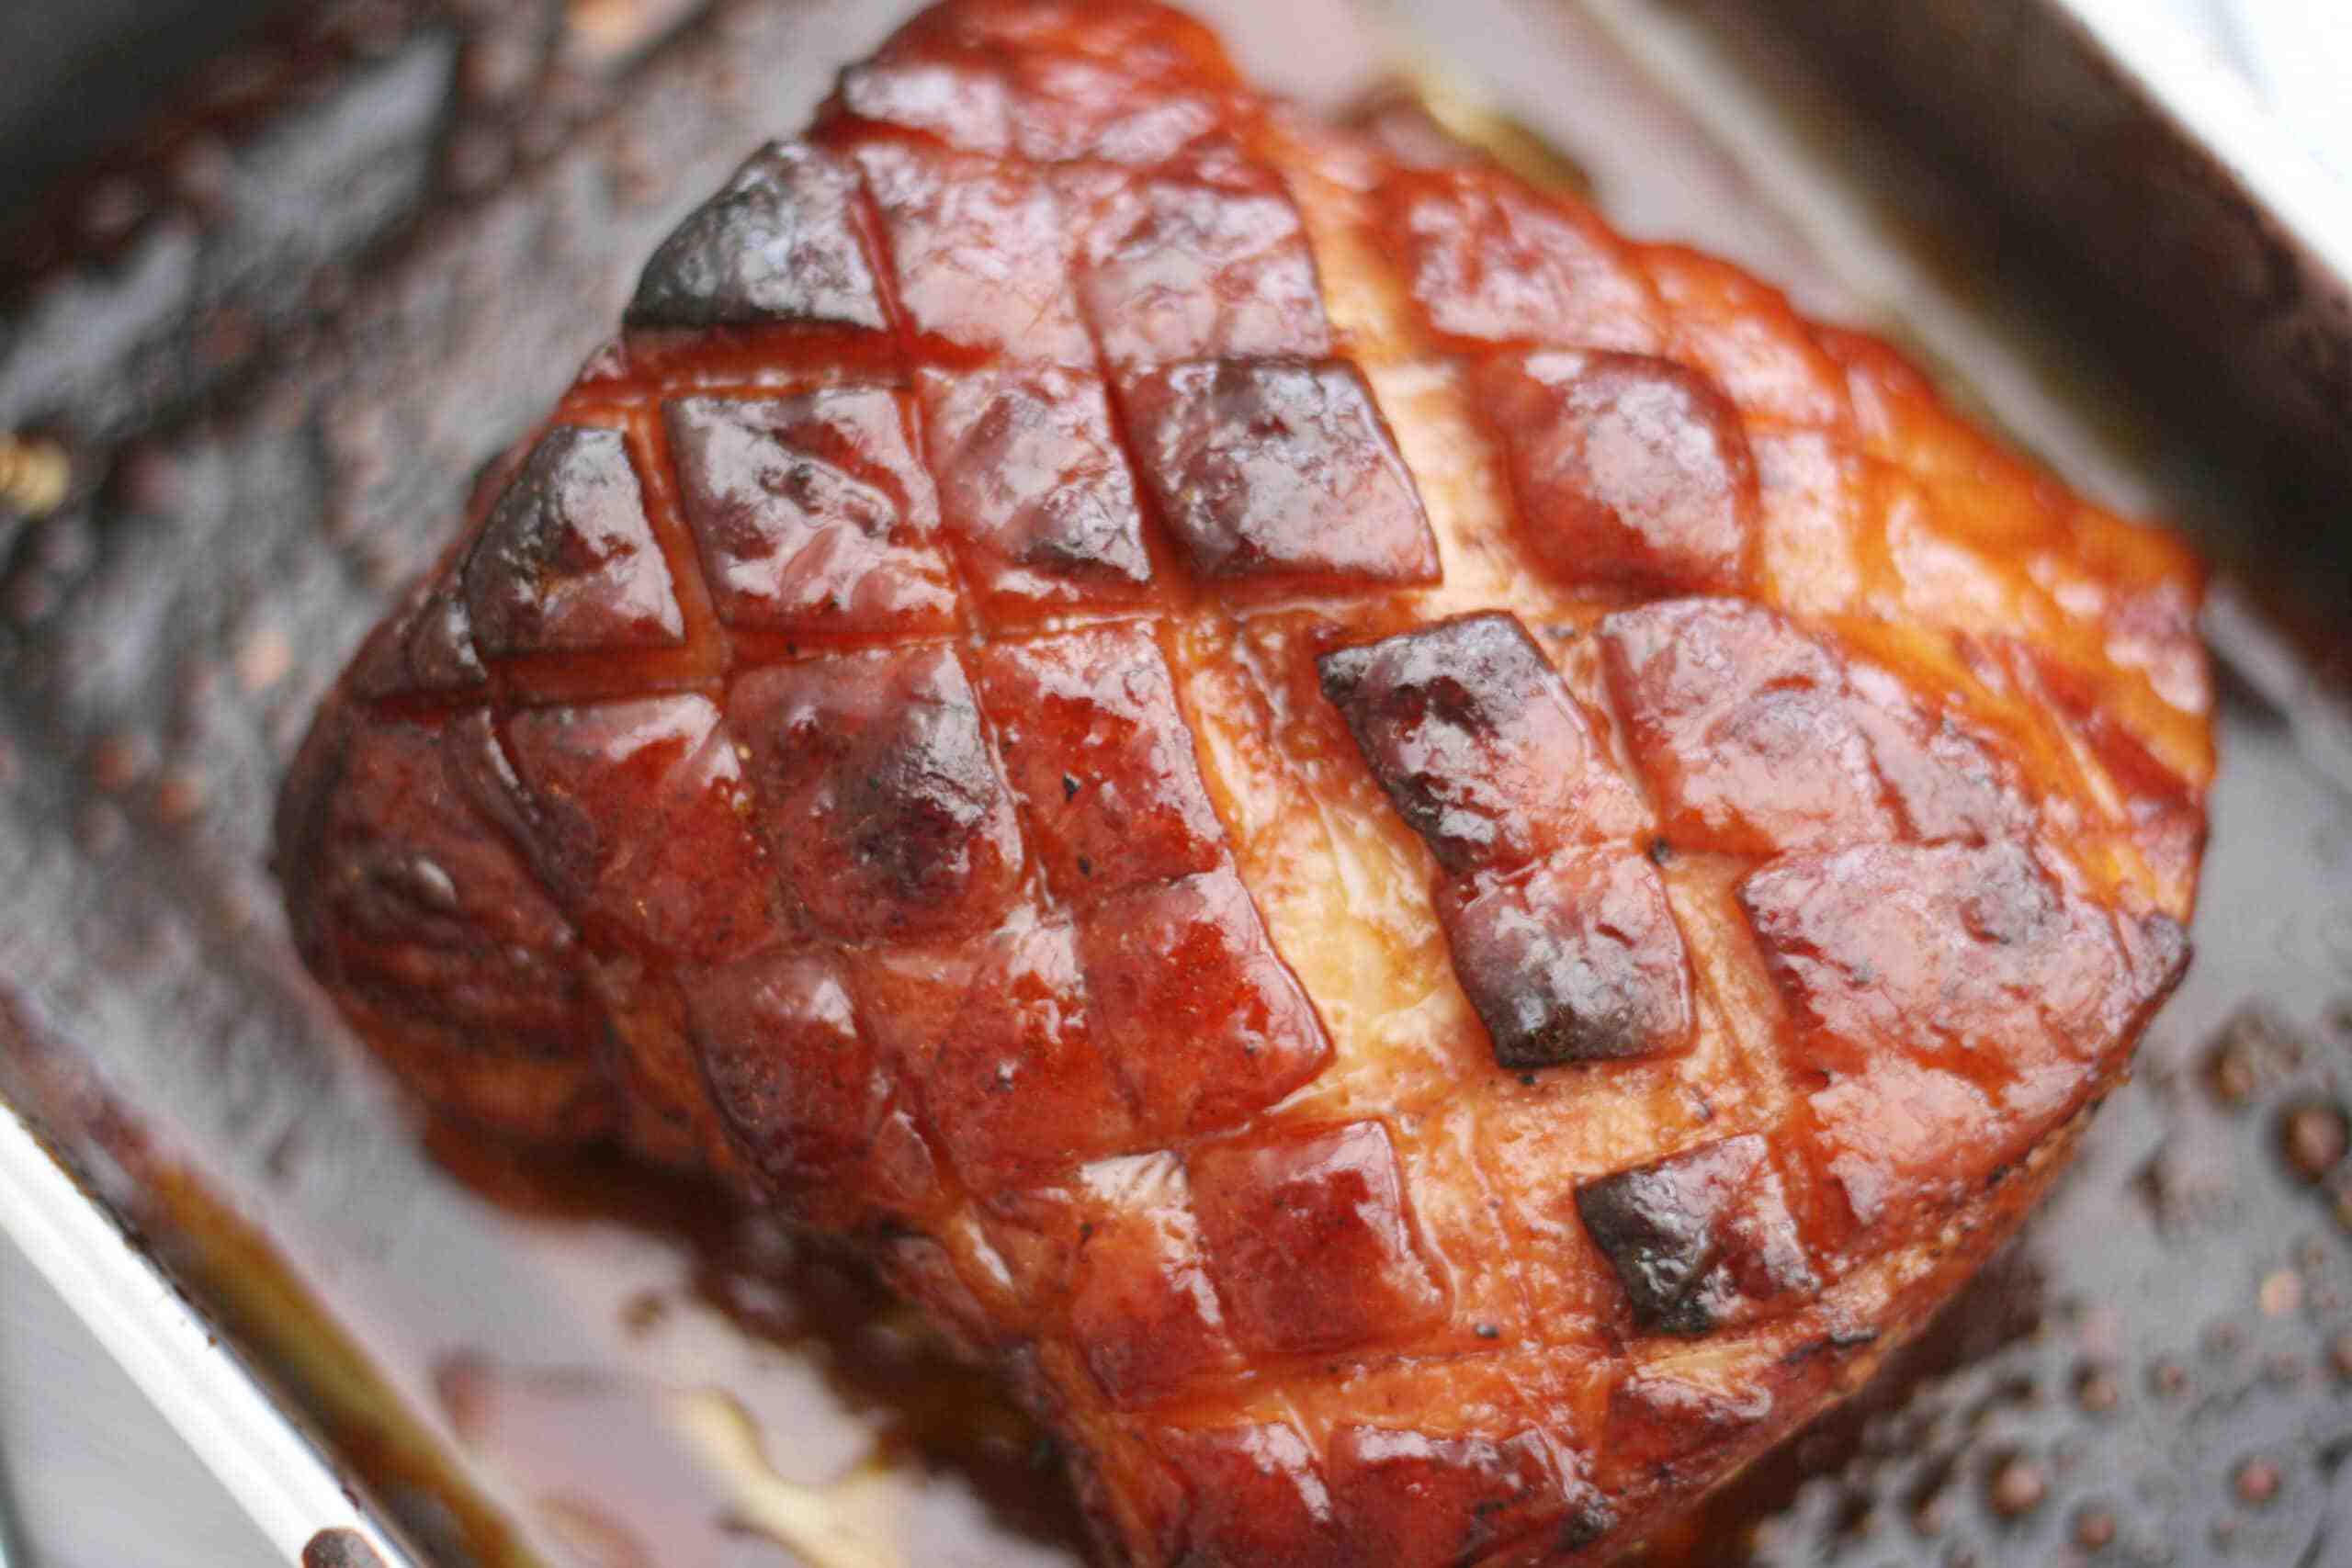 Is it best to boil or roast a gammon joint?